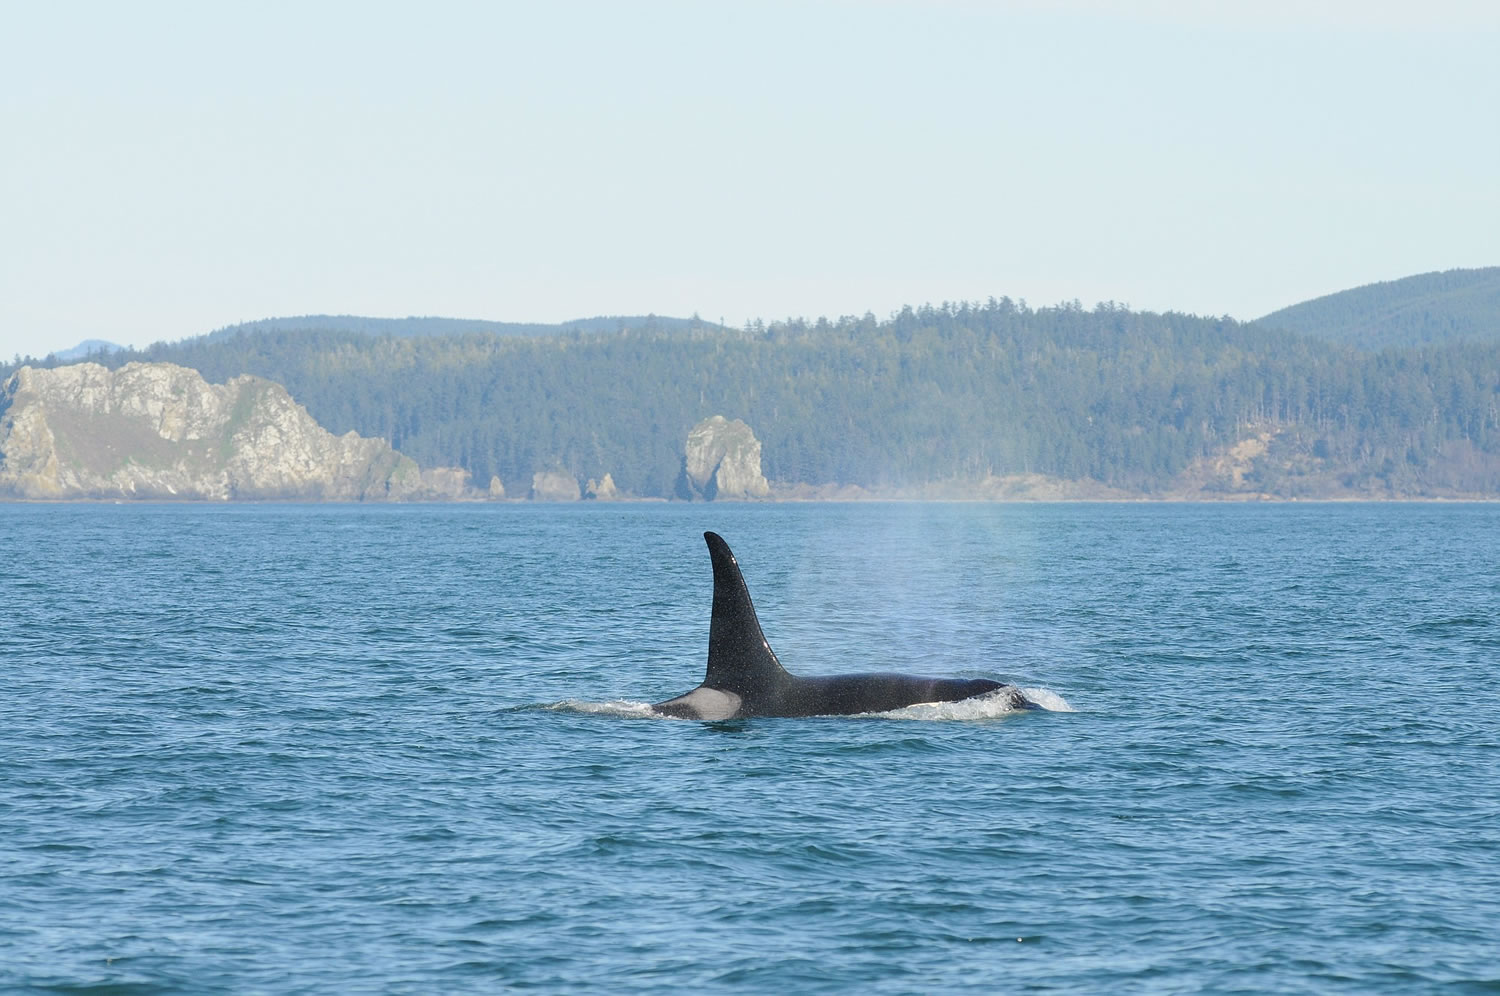 Federal researchers are working to learn more about the diet of whales off the West Coast and the role of Columbia River salmon.